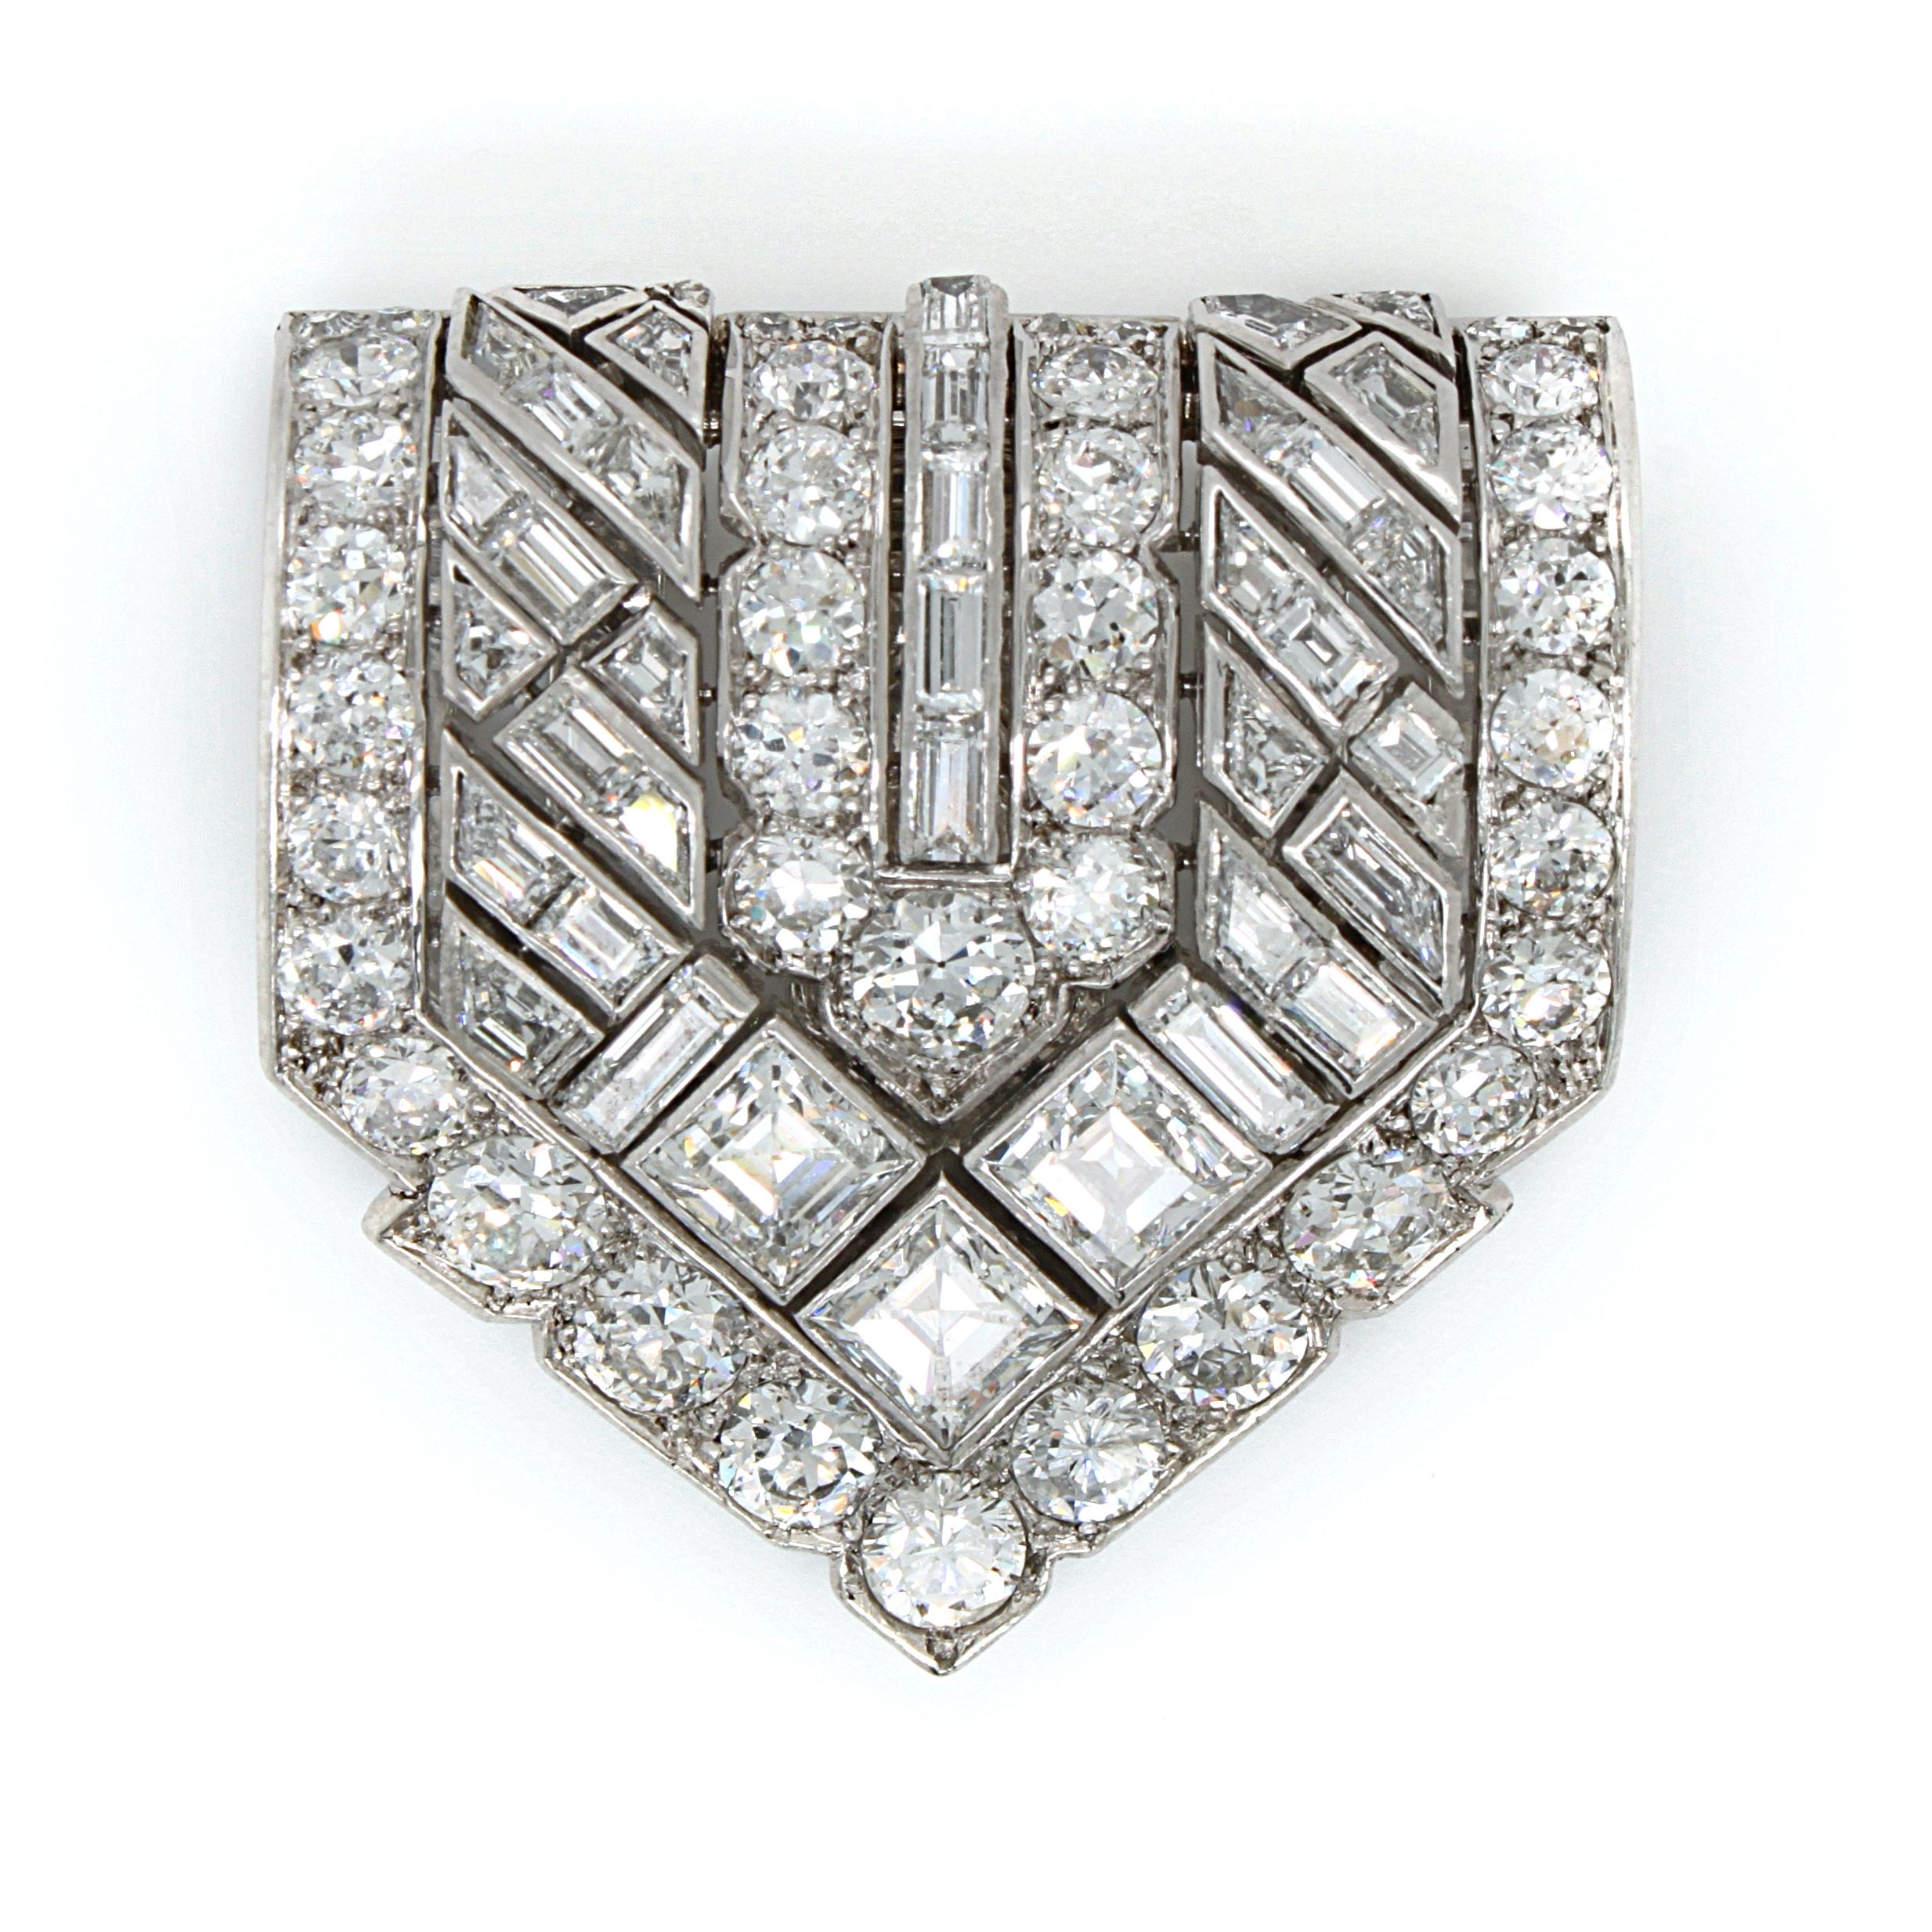 A collective Van Cleef & Arpels diamond Art Deco clip, French, ca. 1920s. 

The clip is set with round brilliant cut and rectangular cut diamonds in a geometric manner, making the clip very wearable for any occasion. The diamonds are of very fine